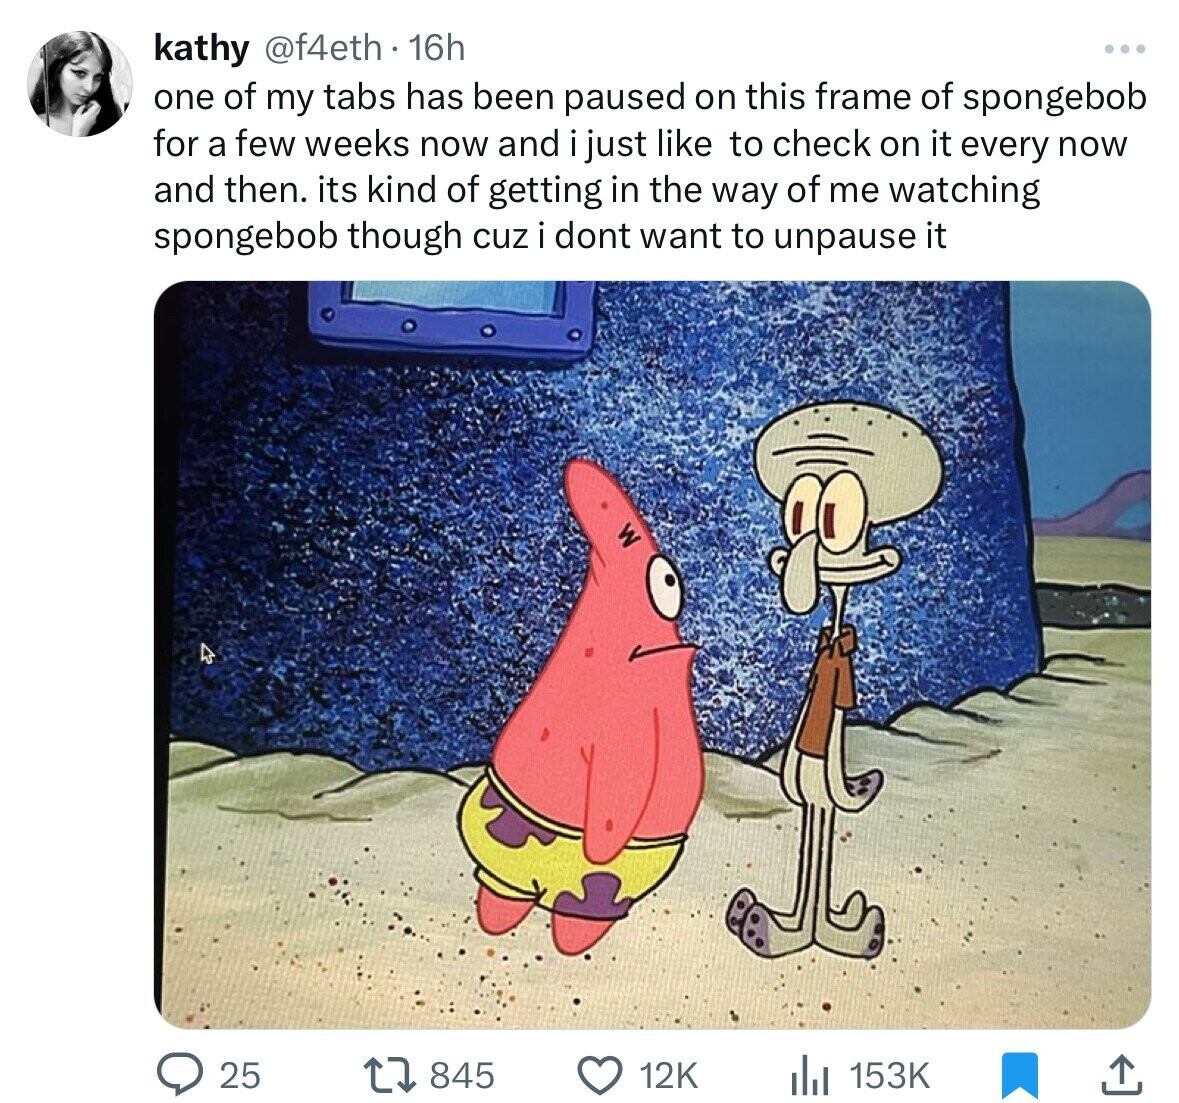 patrick star friend gif - kathy . 16h one of my tabs has been paused on this frame of spongebob for a few weeks now and i just to check on it every now and then. its kind of getting in the way of me watching spongebob though cuz i dont want to unpause it 